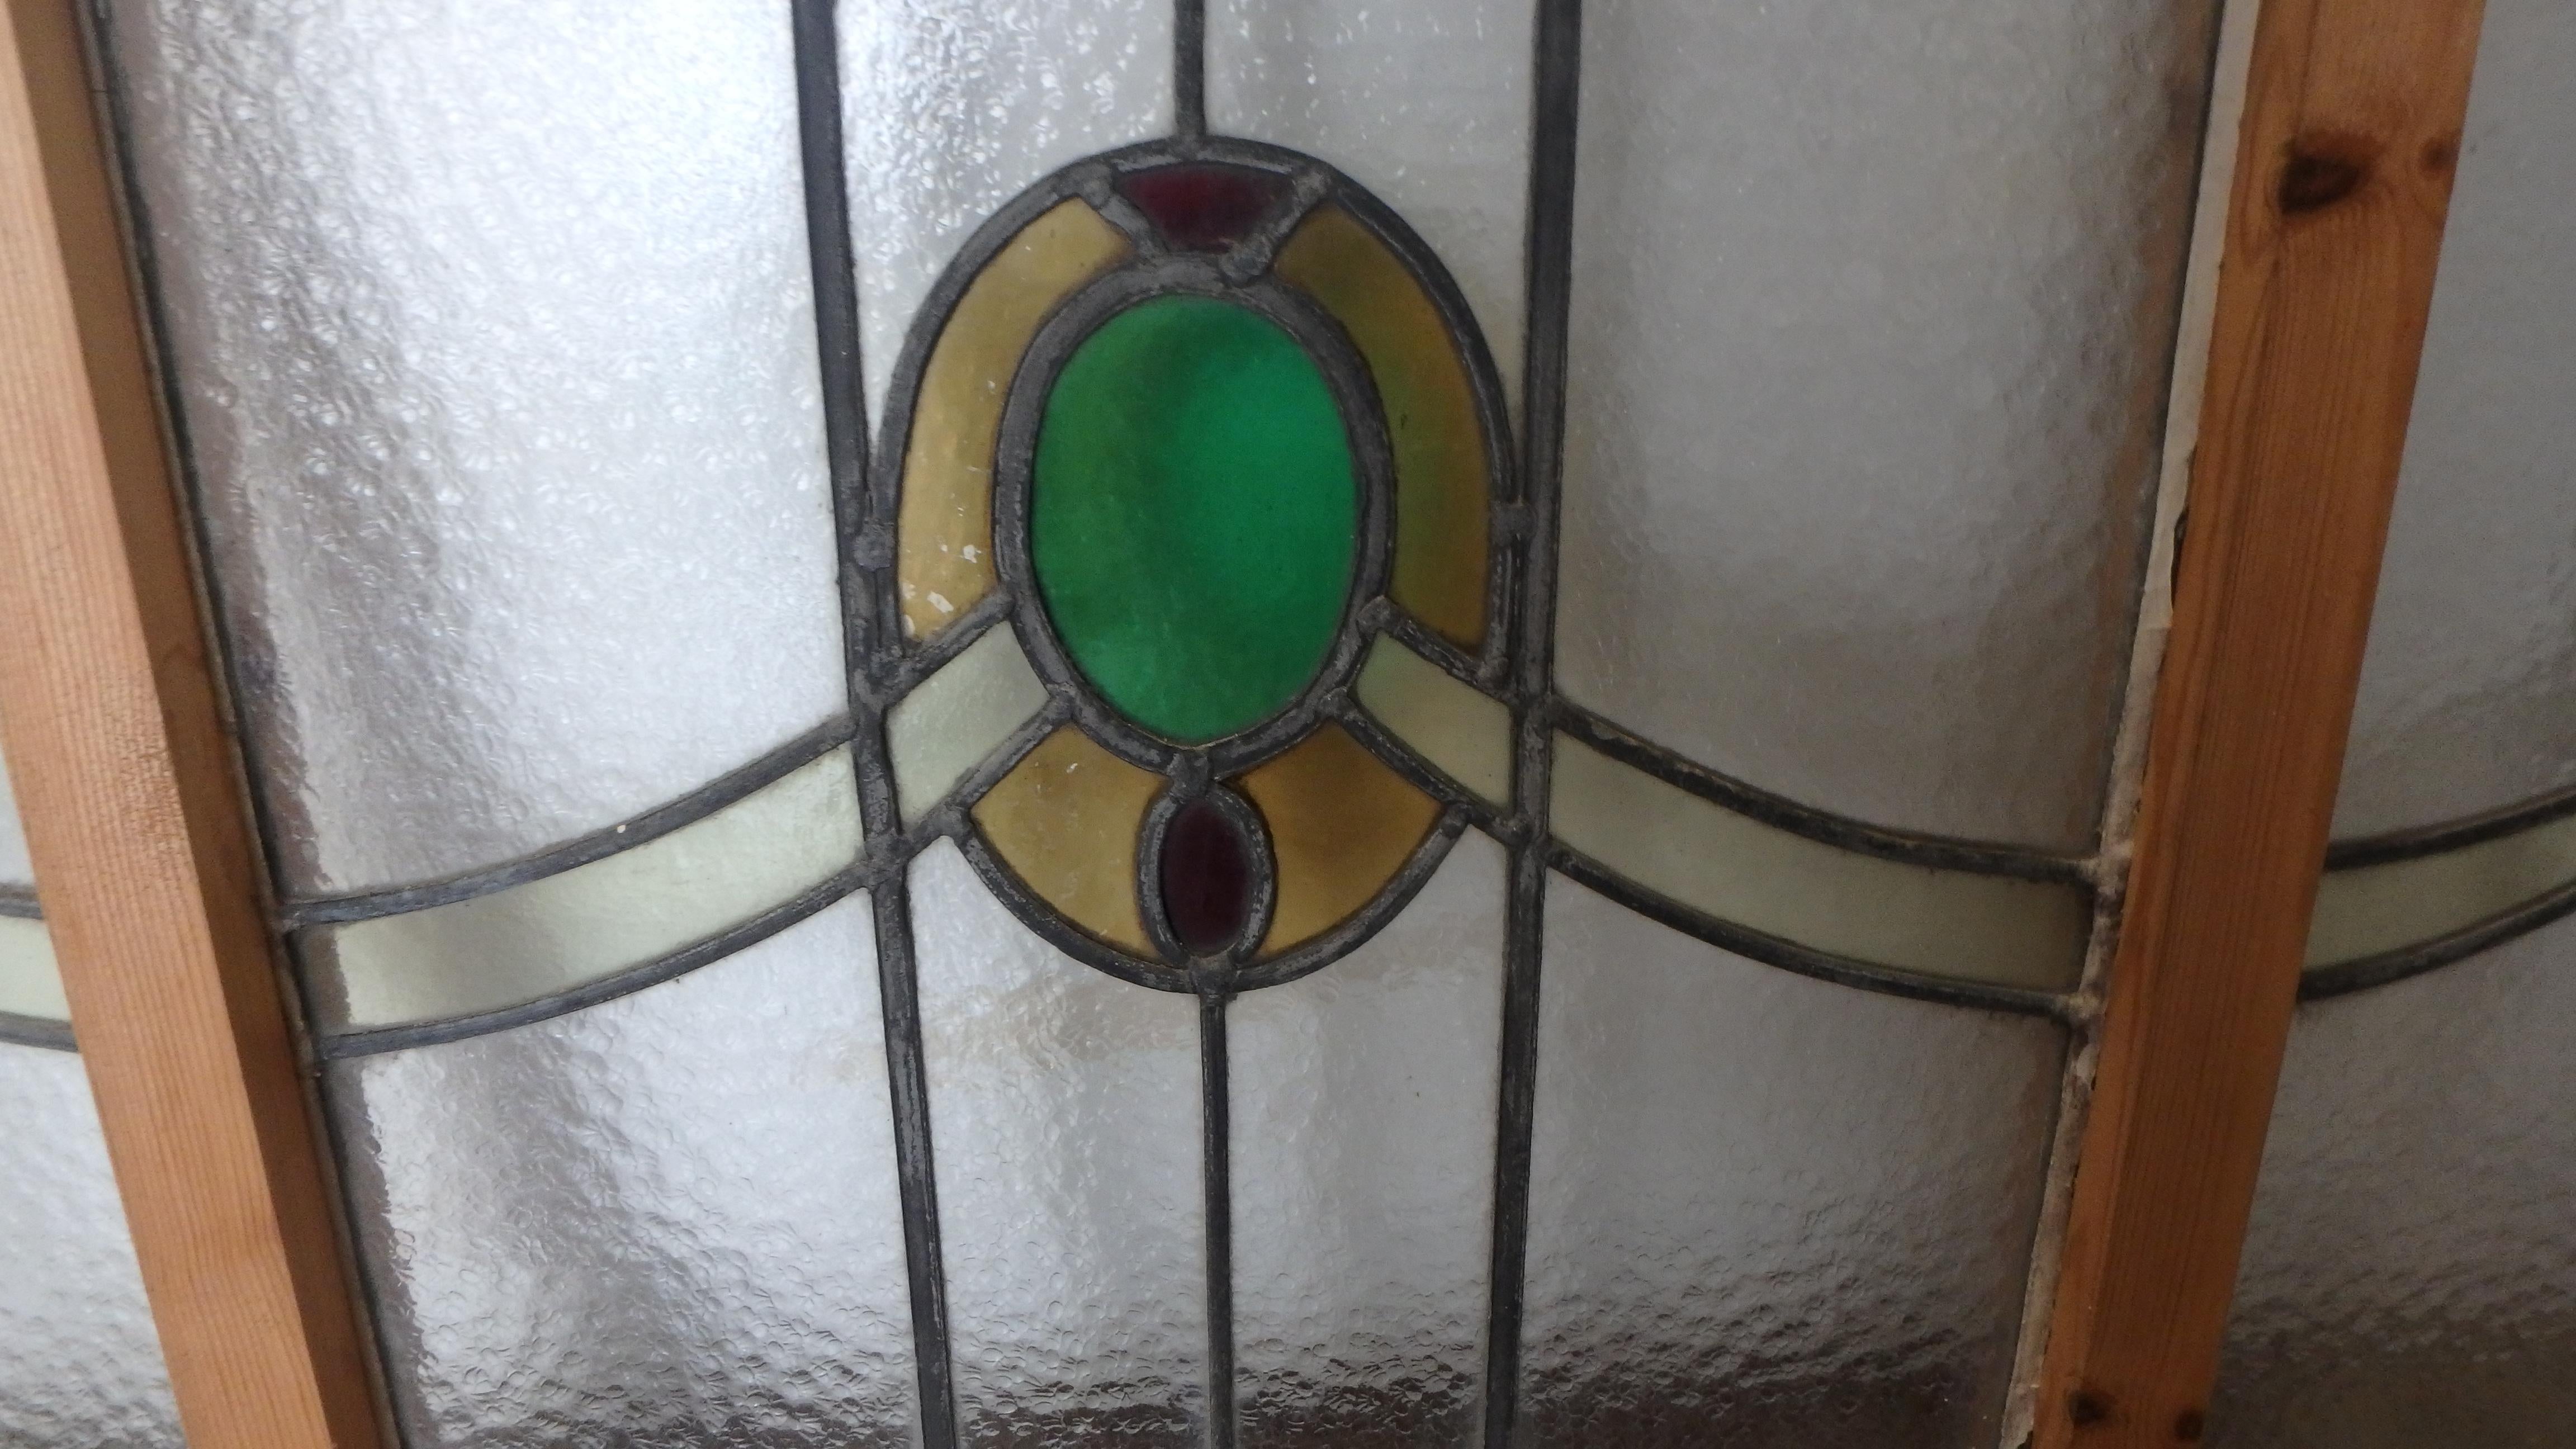 3 paine stained glass window. Set in new frame. Glass is from late 1800s period.